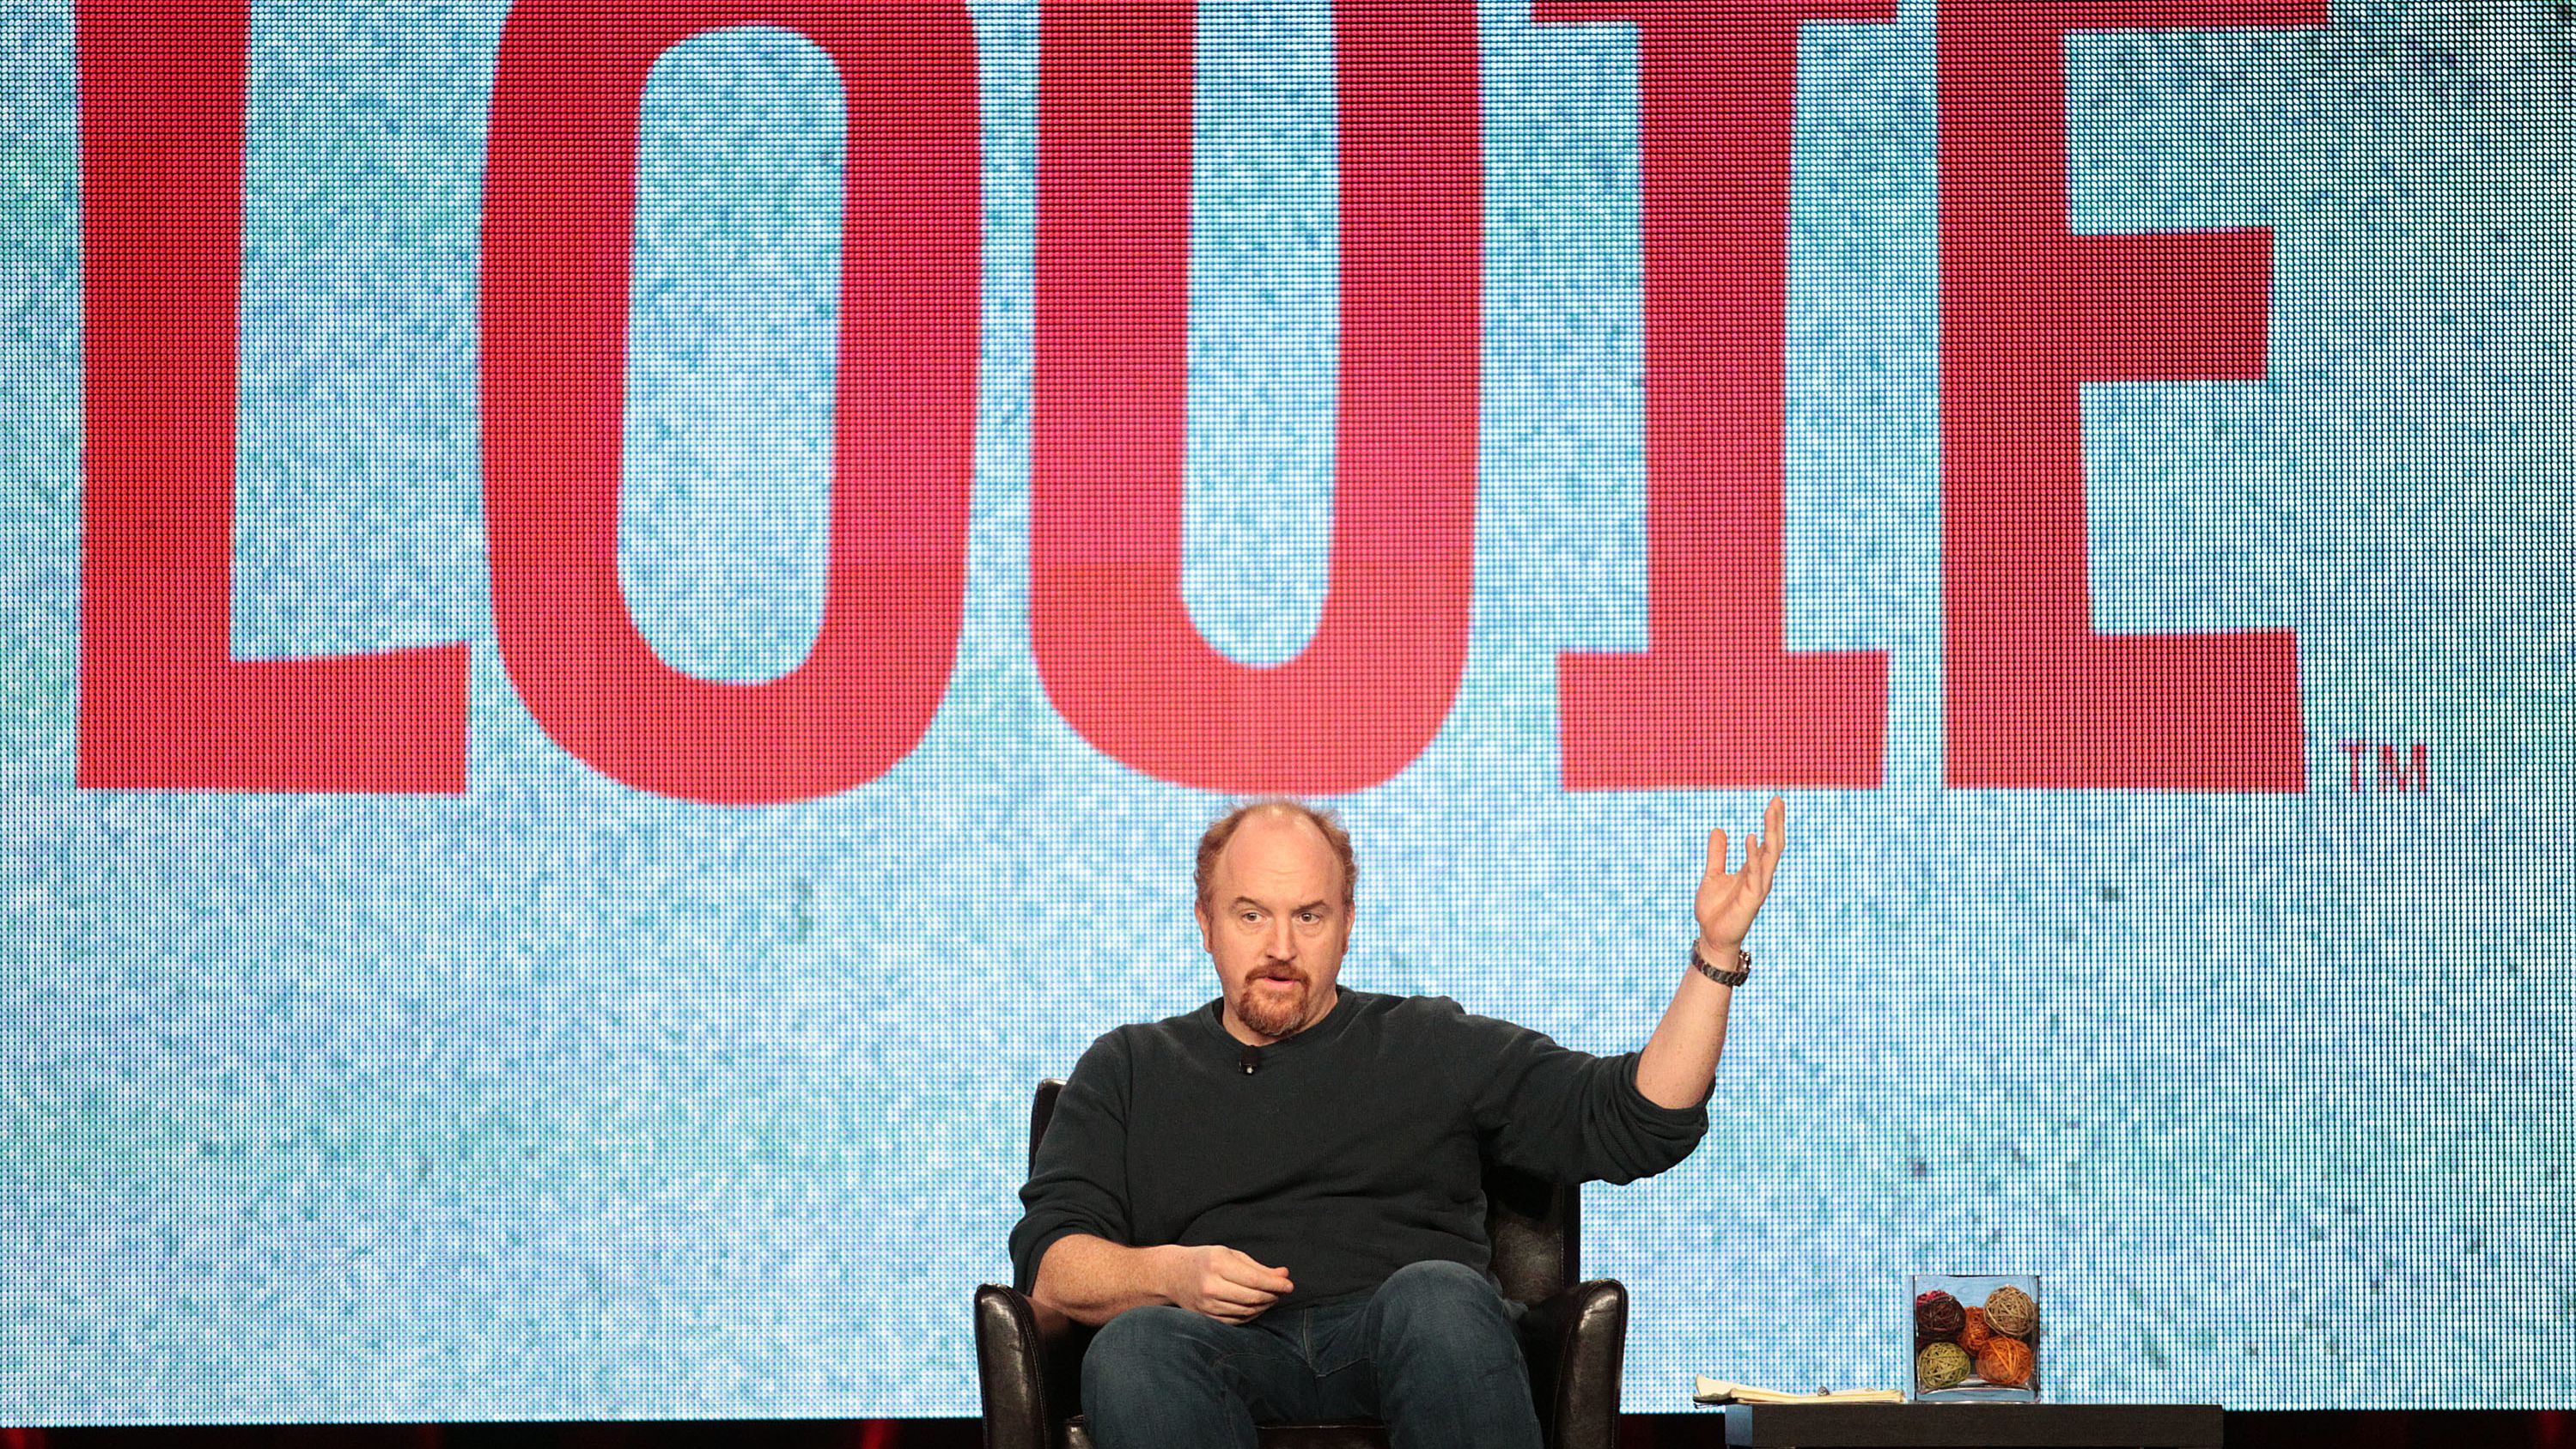 Louis C.K. attends a press panel for his FX show "Louie" in January 2012. 